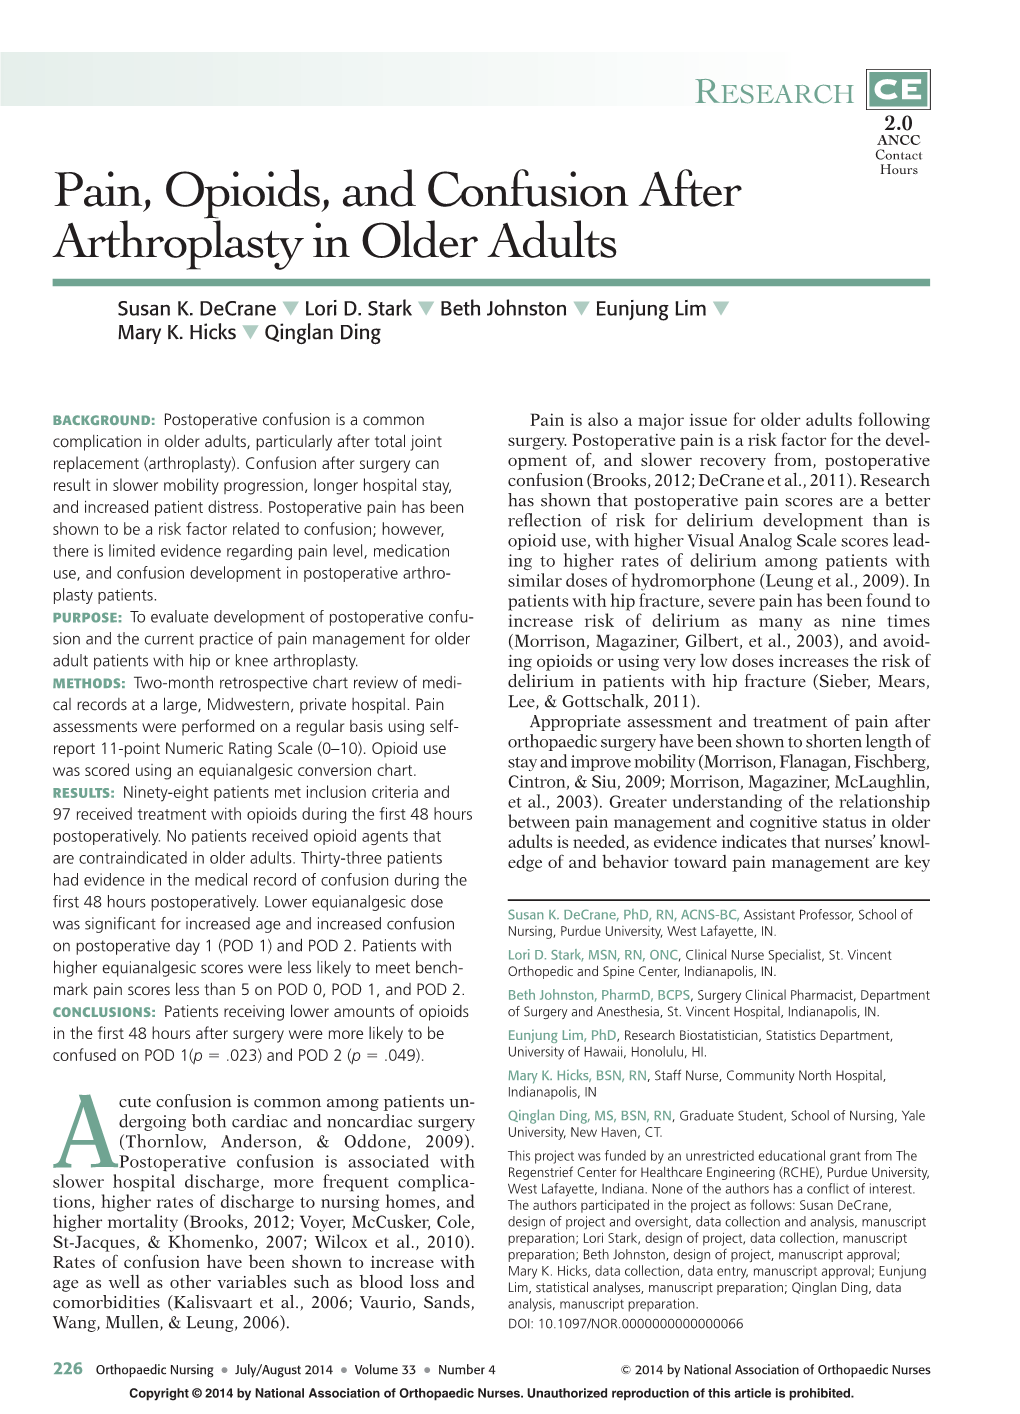 Pain, Opioids, and Confusion After Arthroplasty in Older Adults